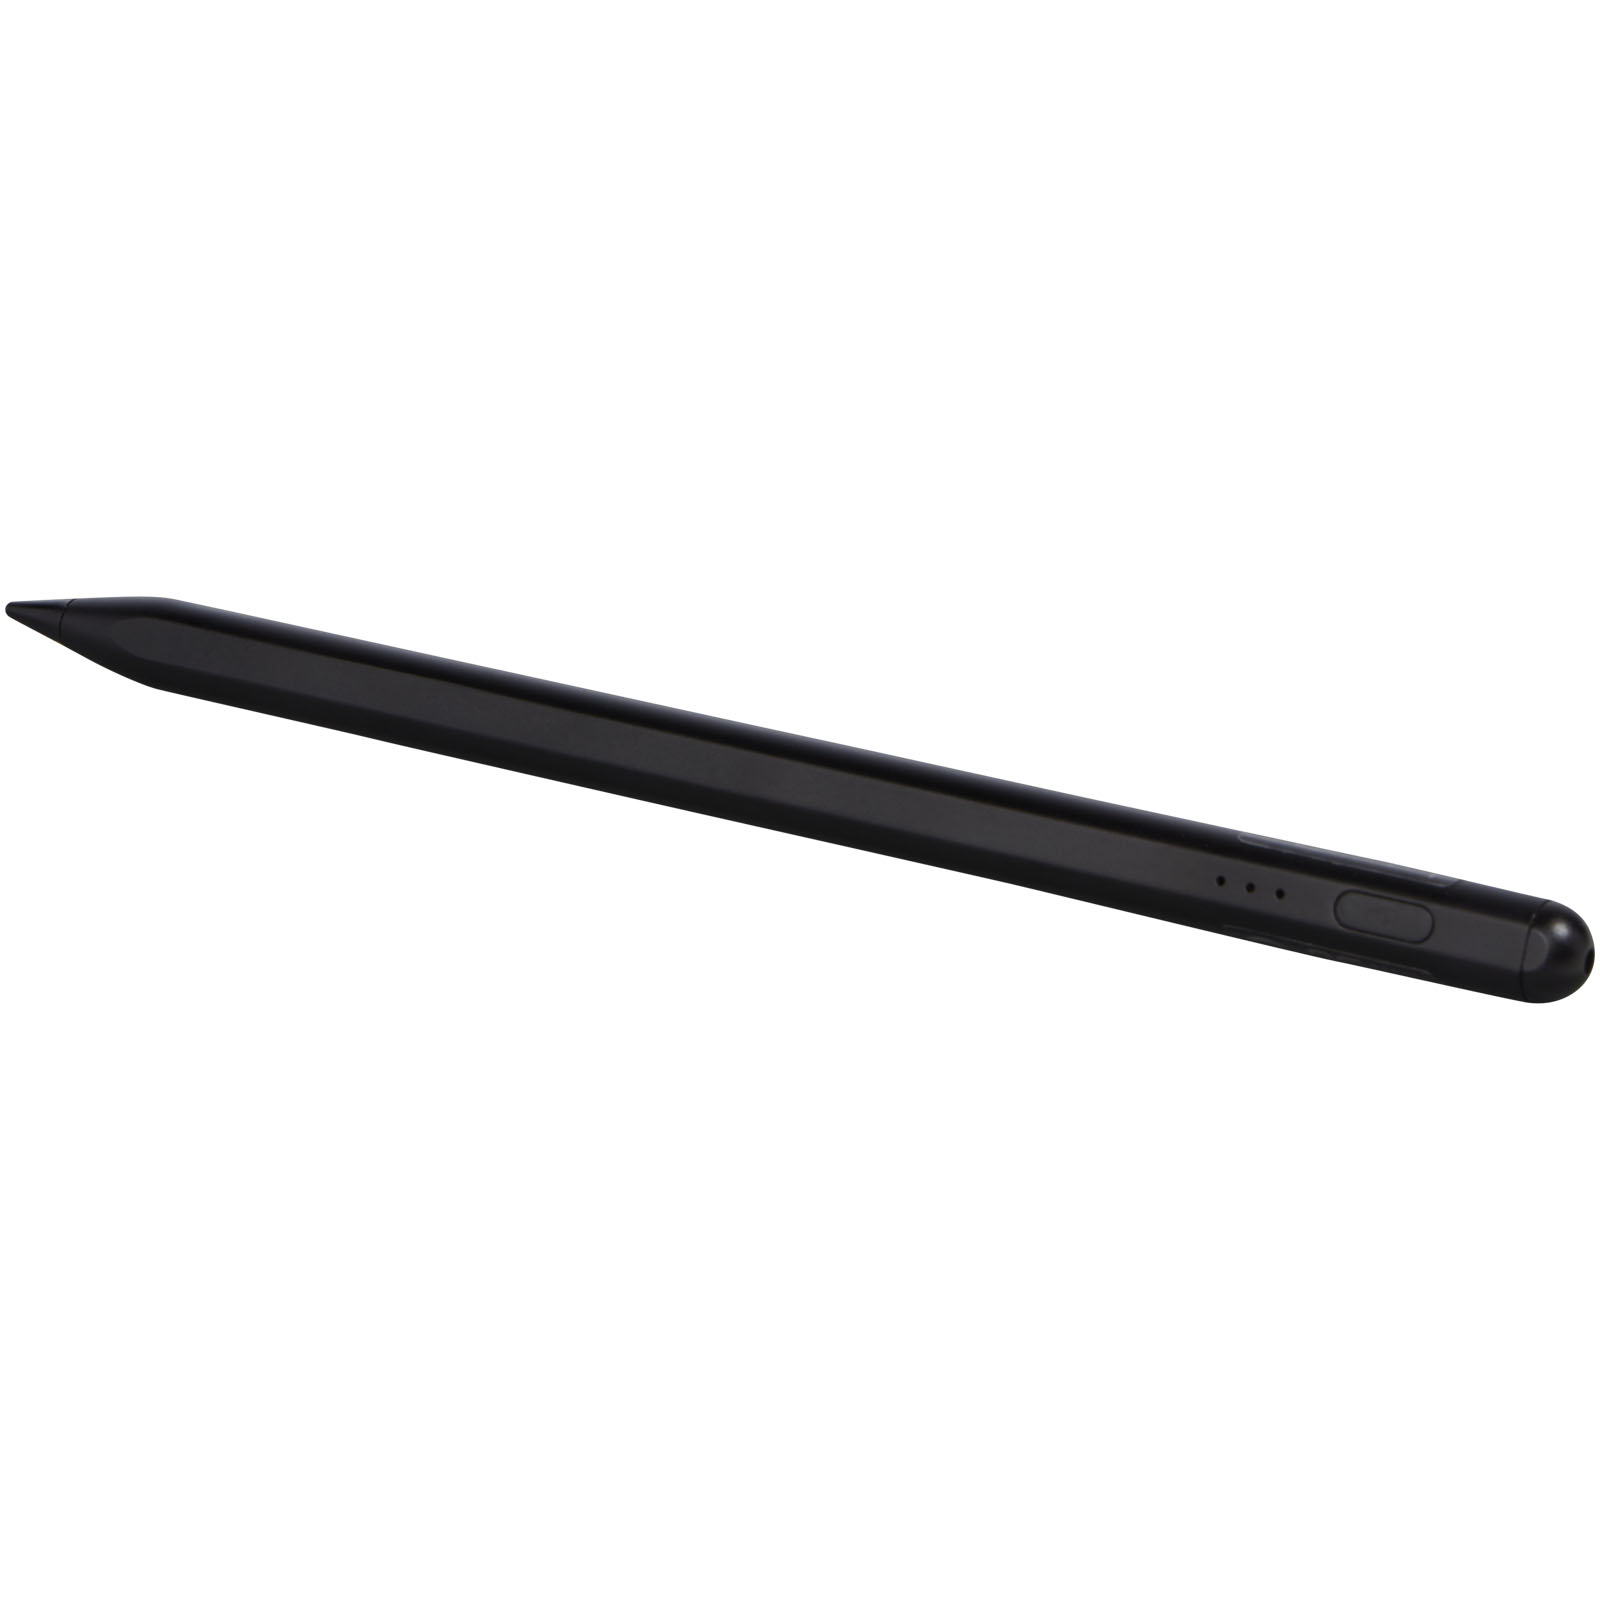 Advertising Telephone & Tablet Accessories - Hybrid Active stylus pen for iPad